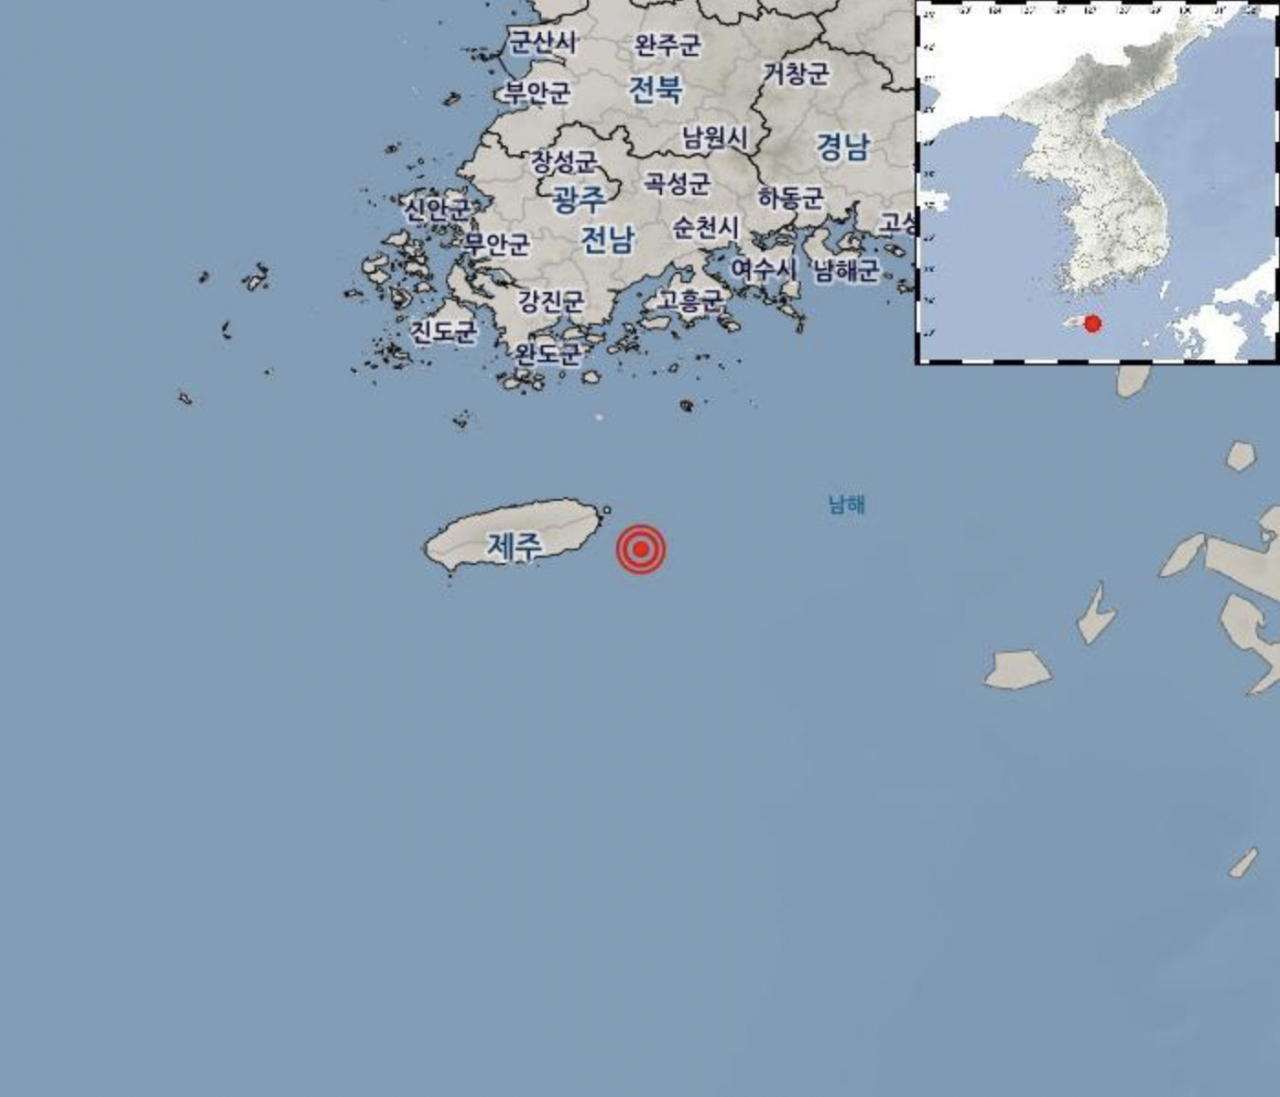 This image shows a red dot where a minor quake occurred near the southern island of Jeju on Monday. (Korea Meteorological Administration)